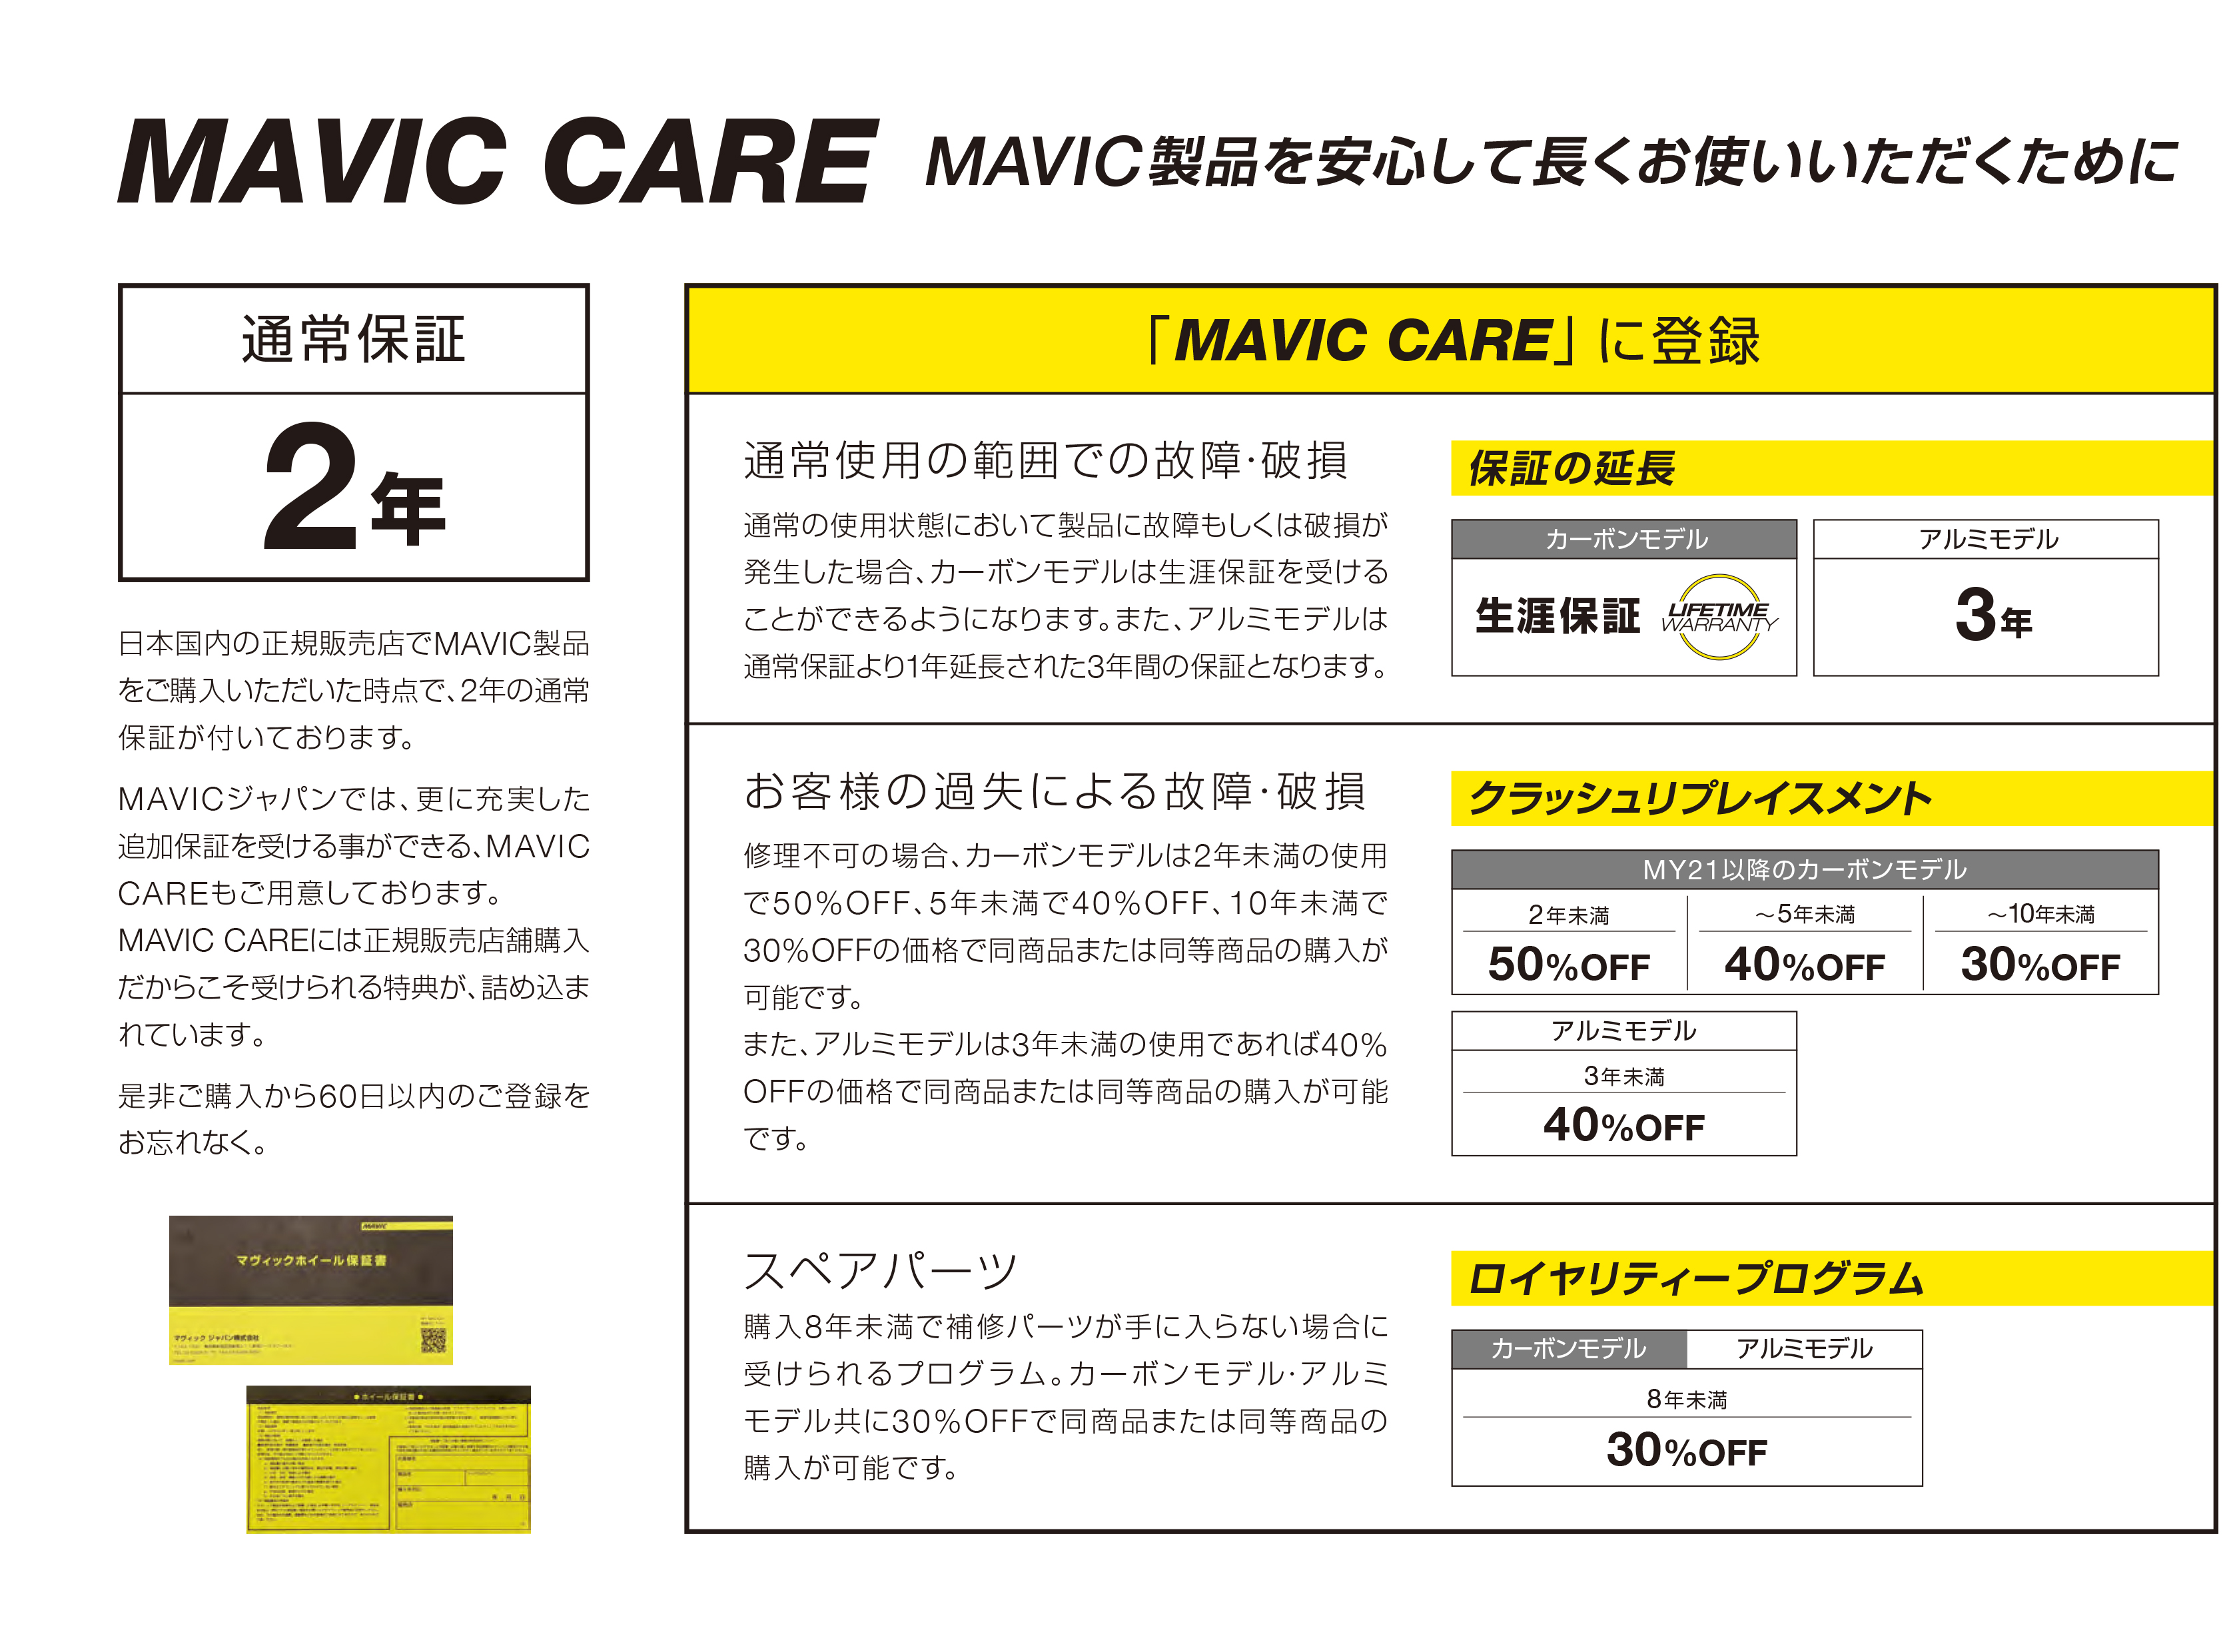 MAVIC CARE FOR CARBON マビック 保証 説明2